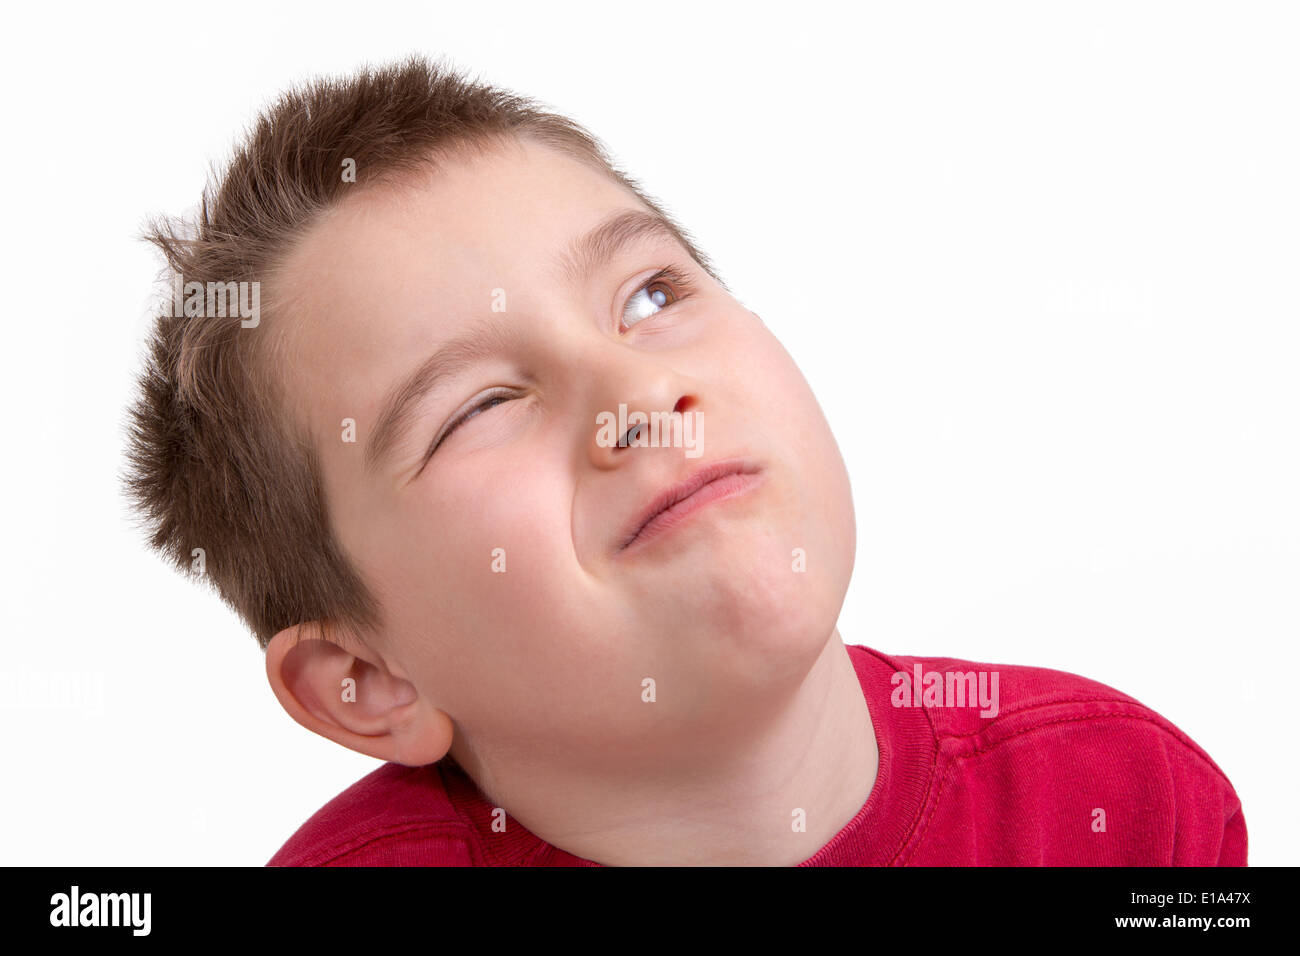 Nine years old kid giving a choosy look with one eye closed Stock Photo